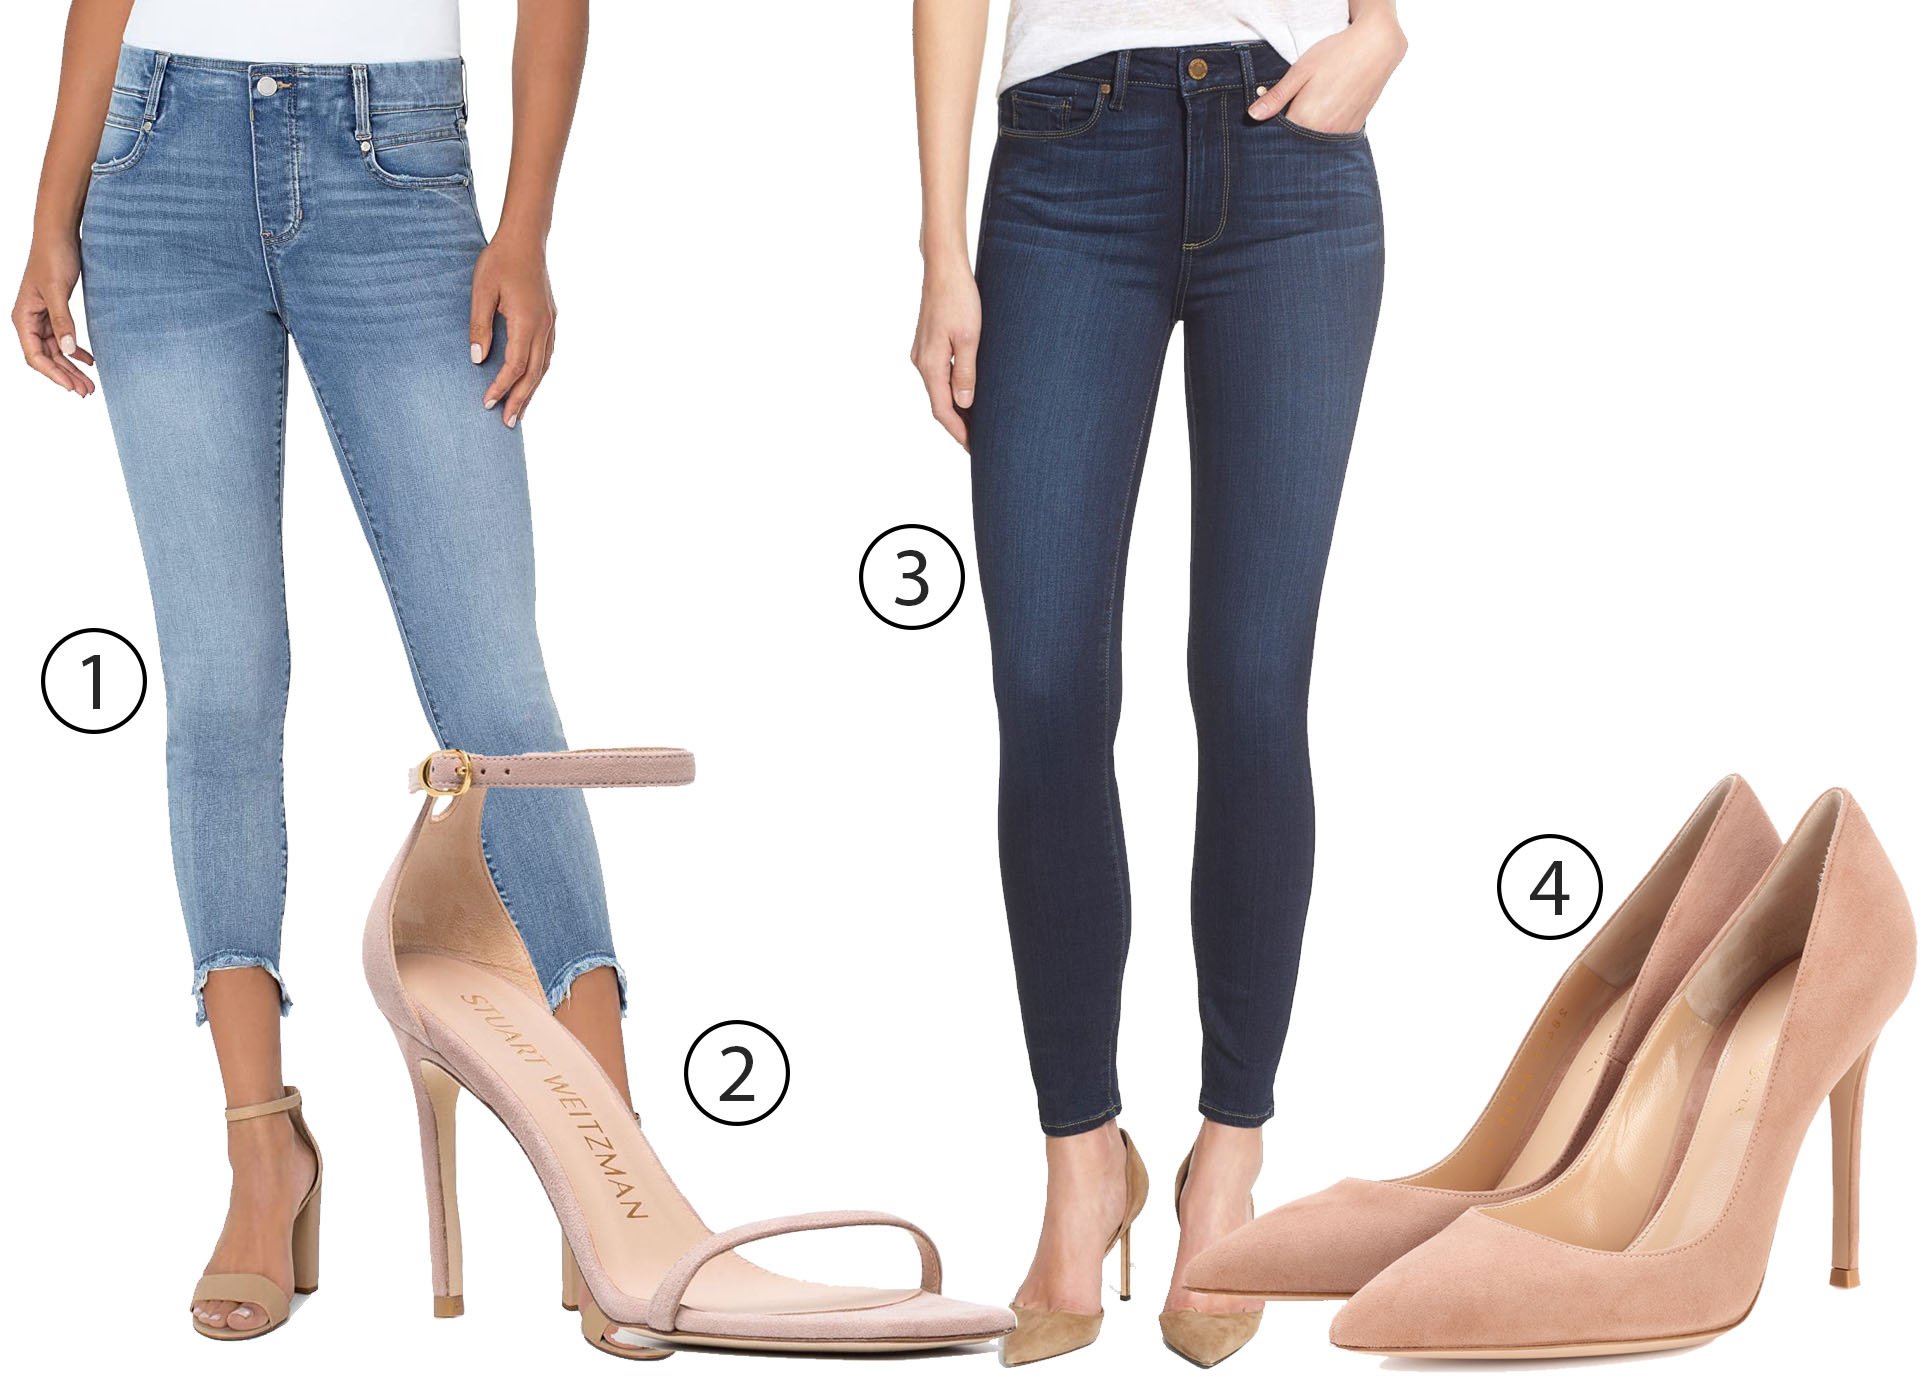 1. Liverpool Gia Glider Pull-On Crop Skinny Jeans 2. Stuart Weitzman Suede Heels 3. Paige Transcend - Hoxton Ultra Skinny Jeans 4. Gianvito Rossi Gianvito Suede Pumps